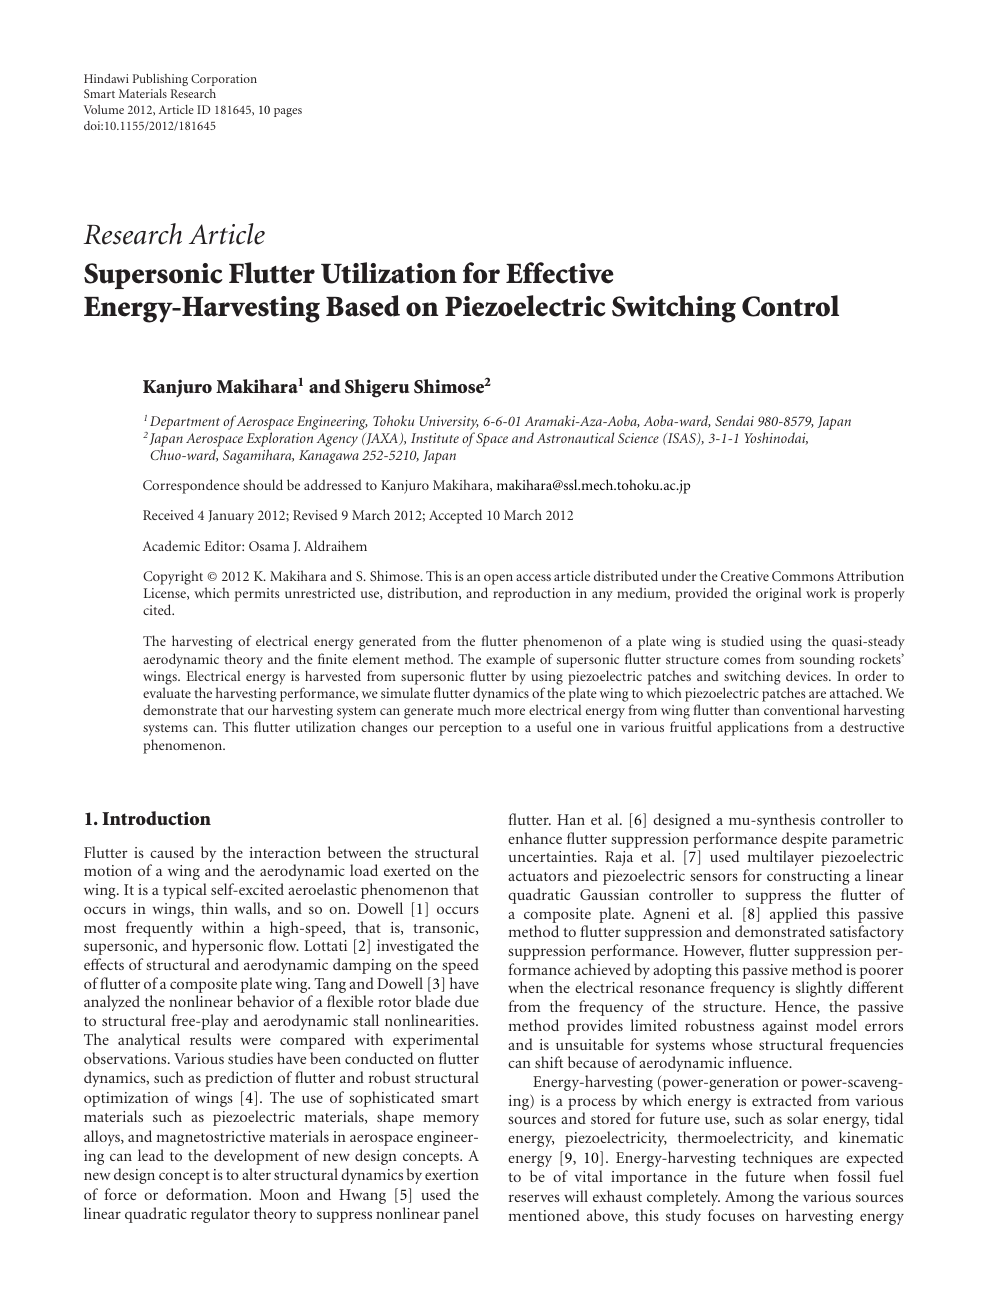 Supersonic Flutter Utilization For Effective Energy Harvesting Based On Piezoelectric Switching Control Topic Of Research Paper In Mechanical Engineering Download Scholarly Article Pdf And Read For Free On Cyberleninka Open Science Hub